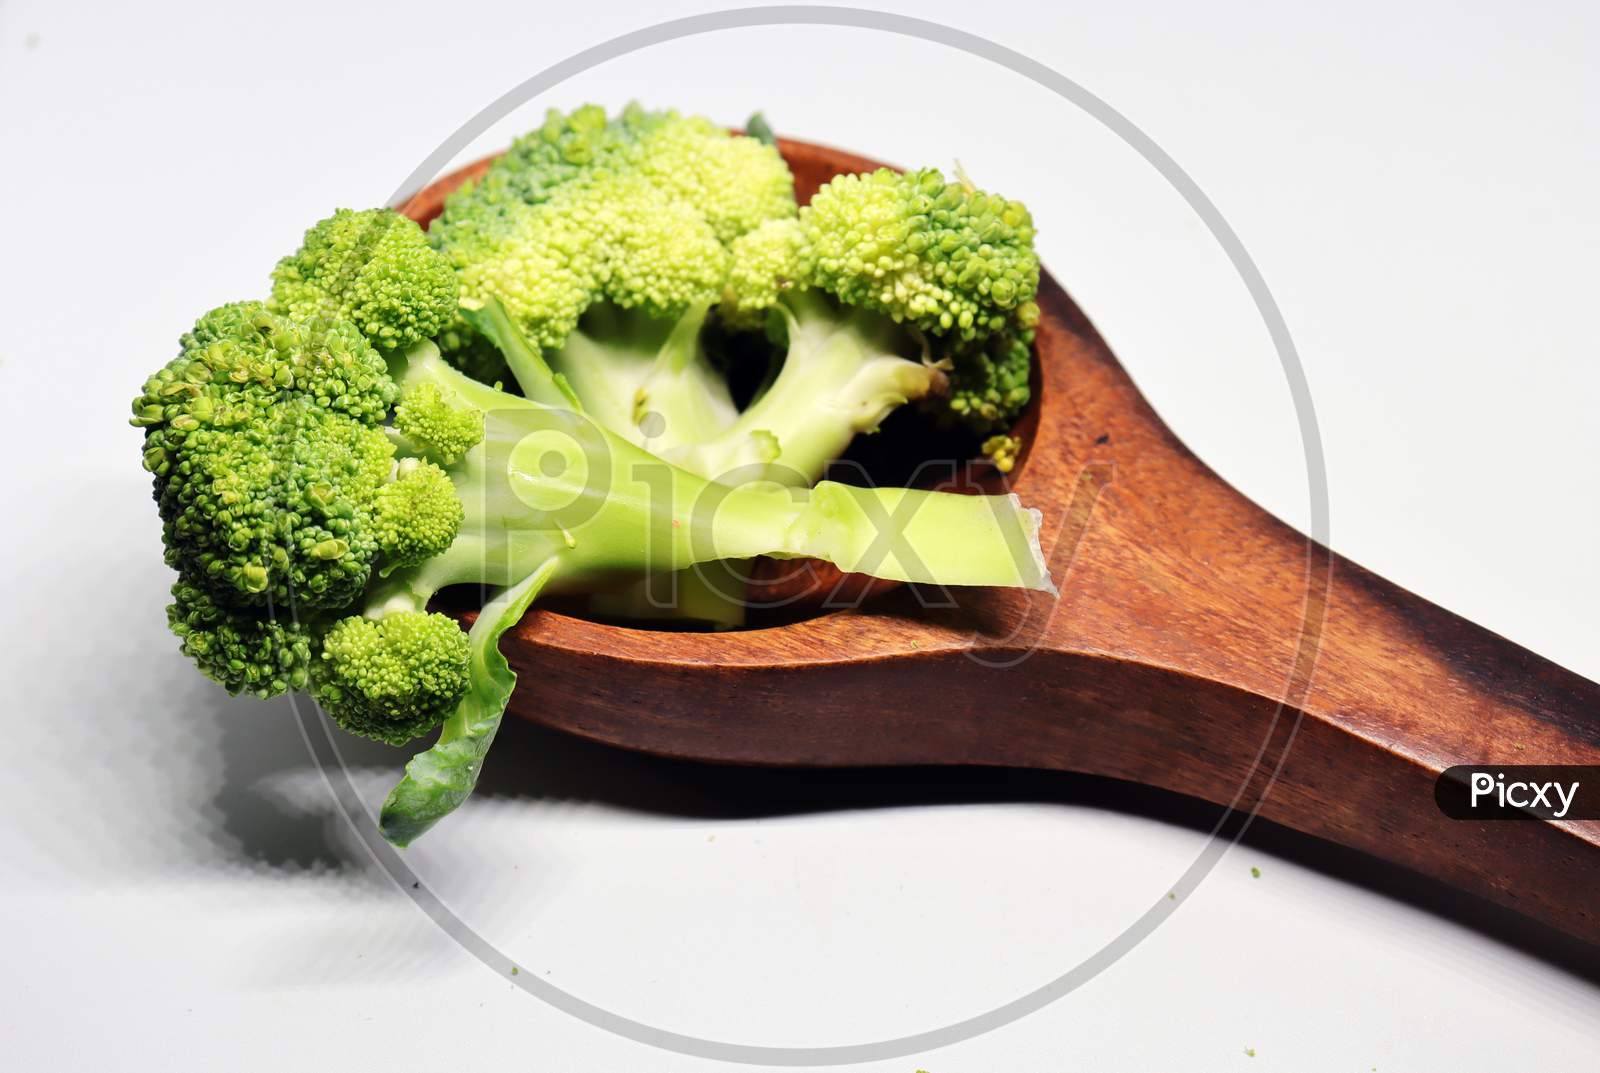 healthy vegetable broccoli on white background